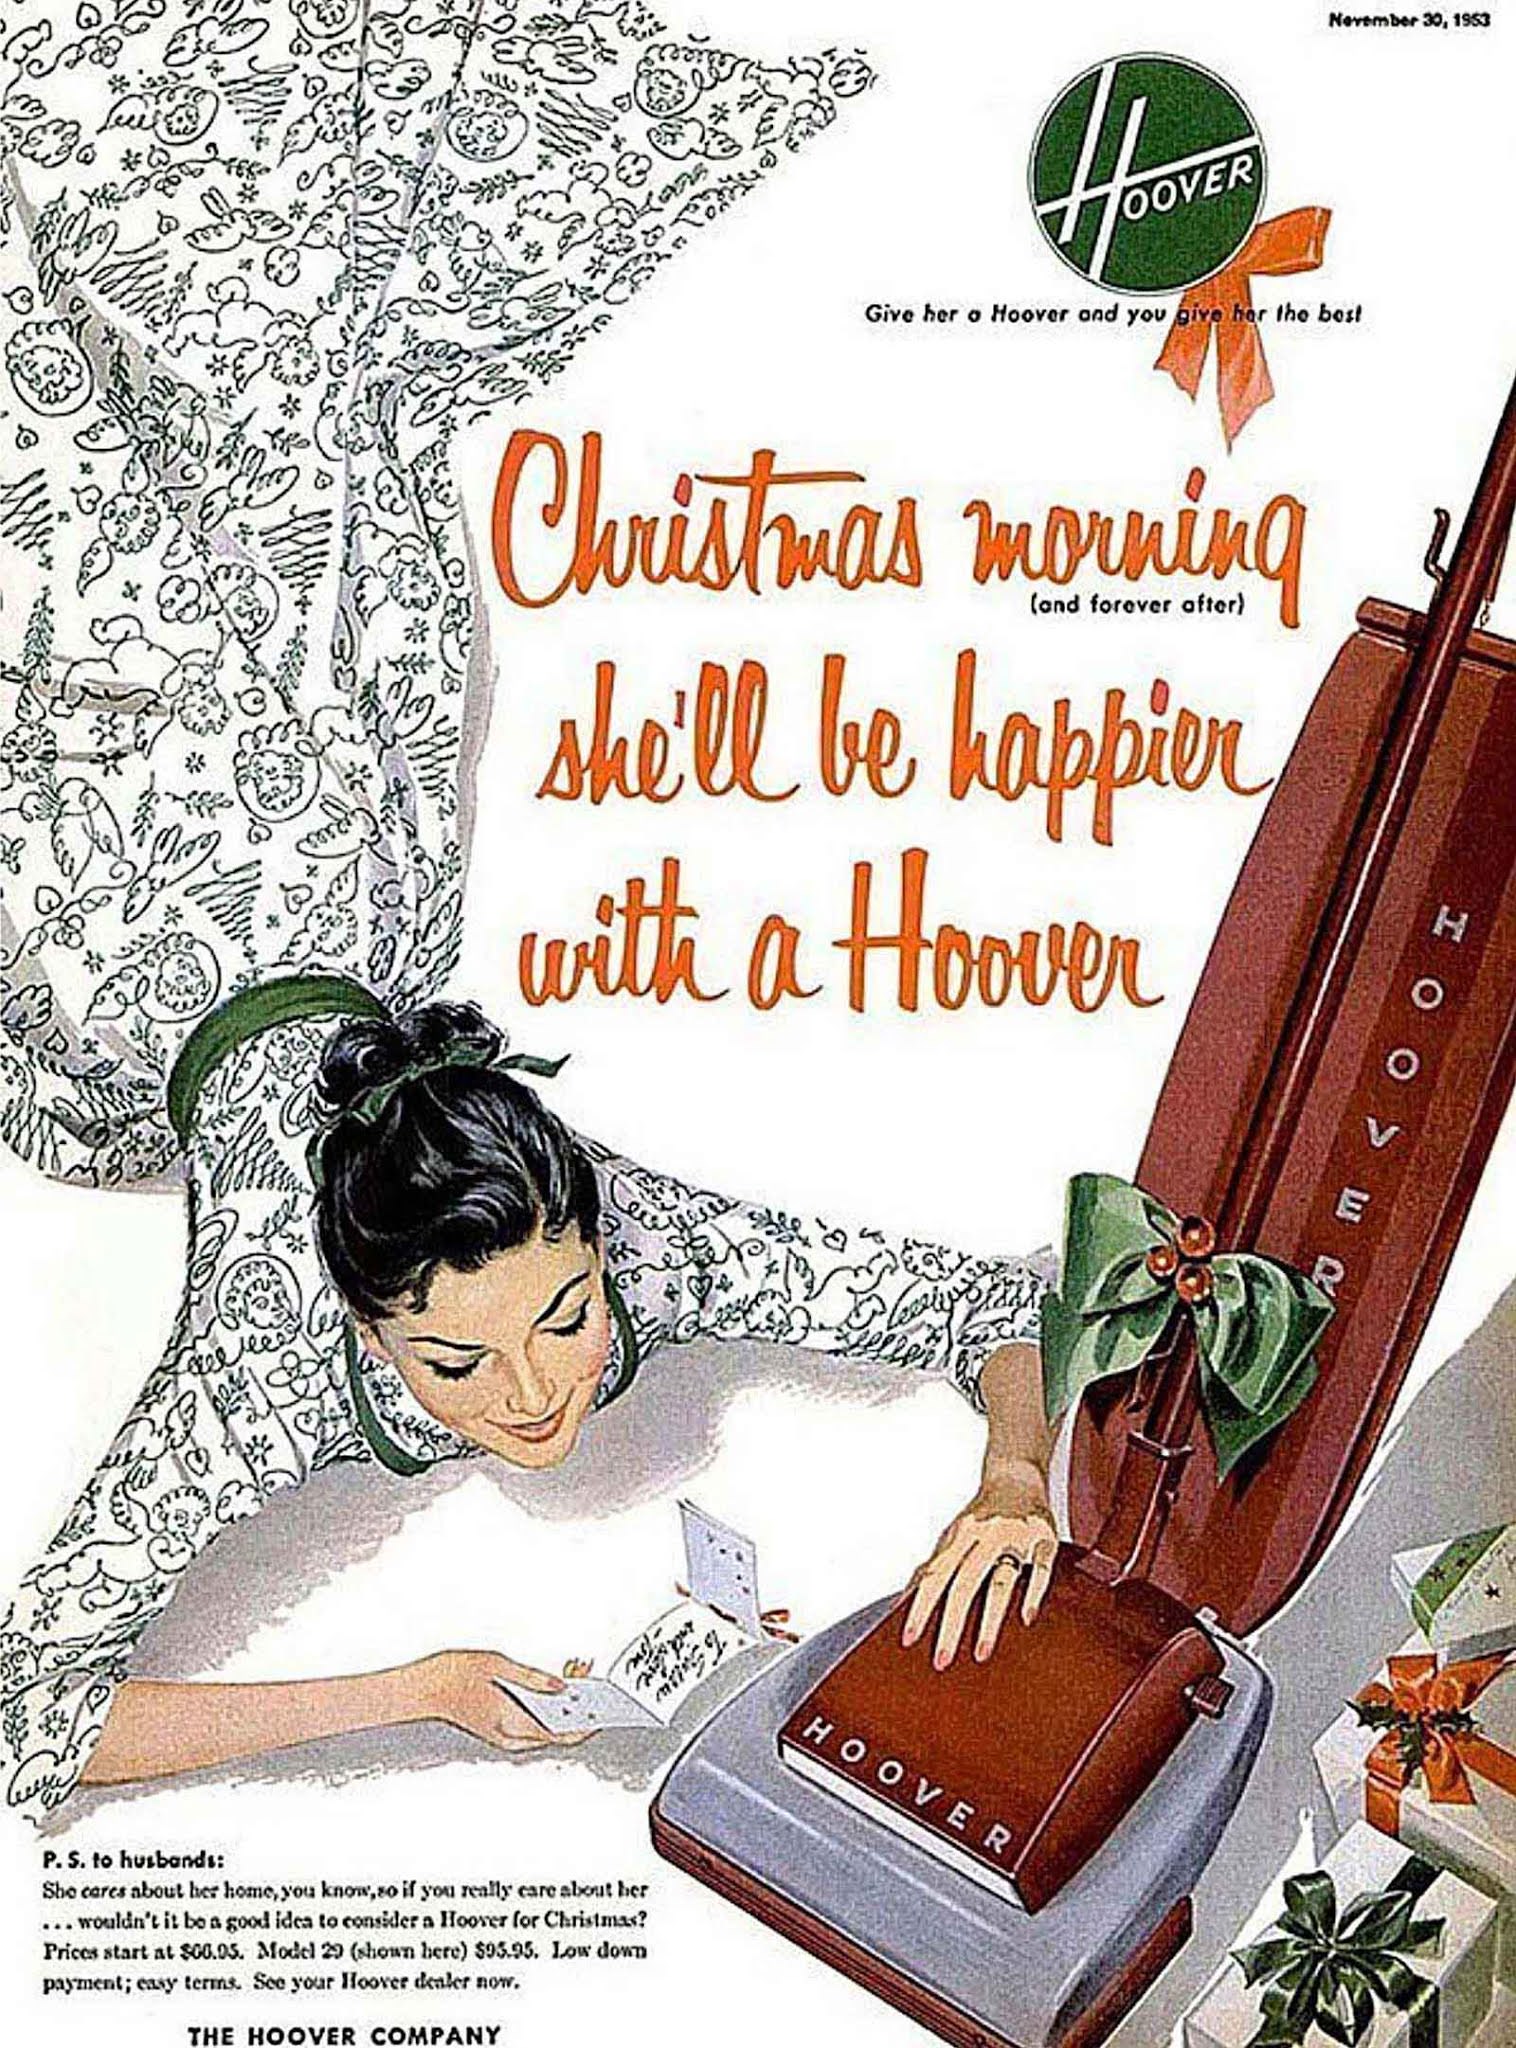 An ad from Hoover company.